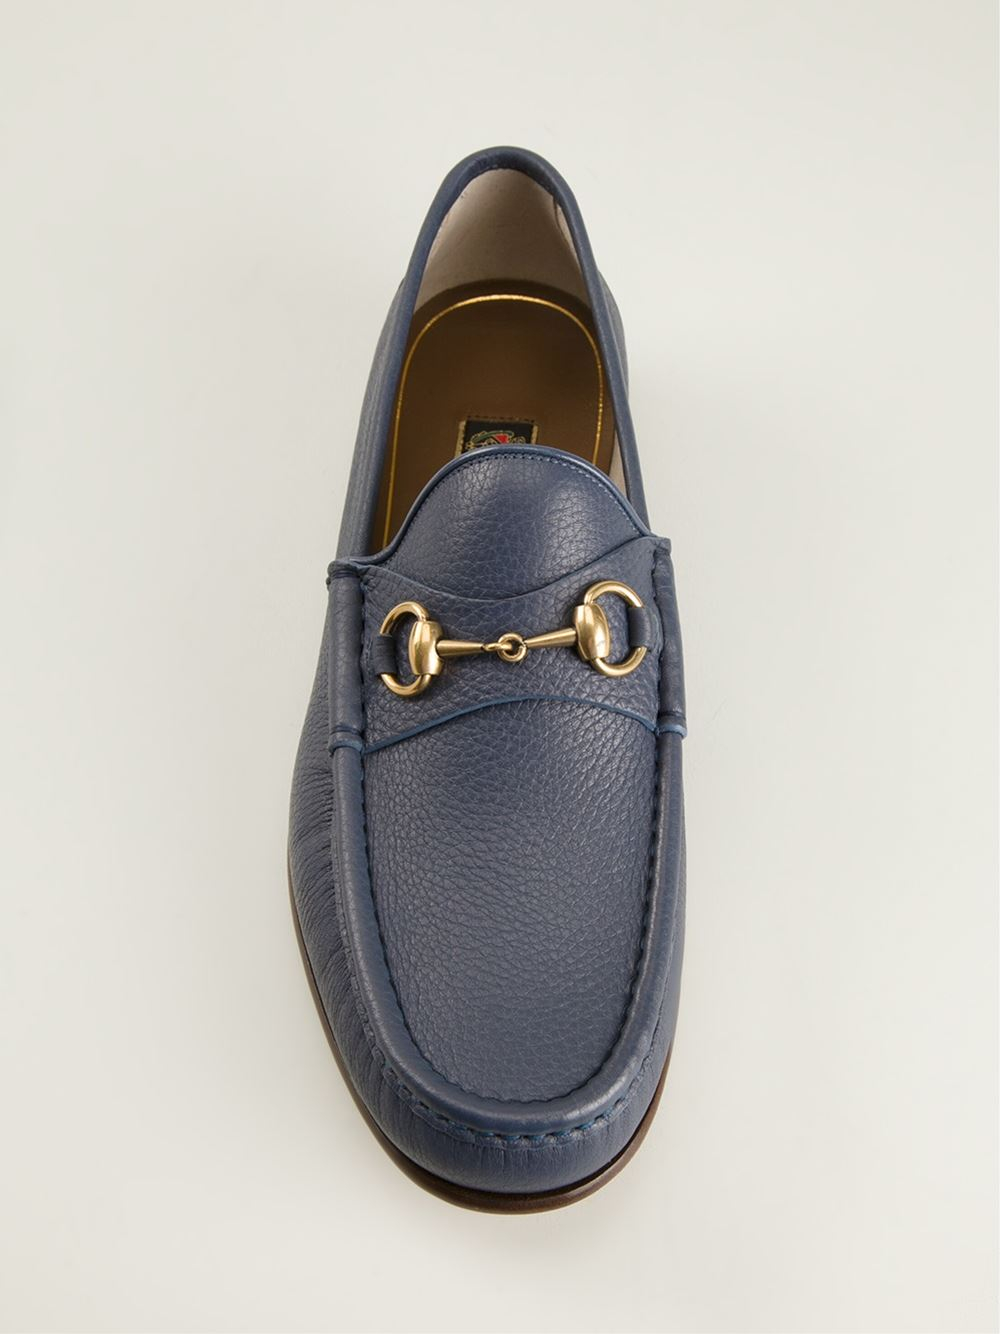 Lyst - Gucci Horse Bit Loafers in Blue for Men